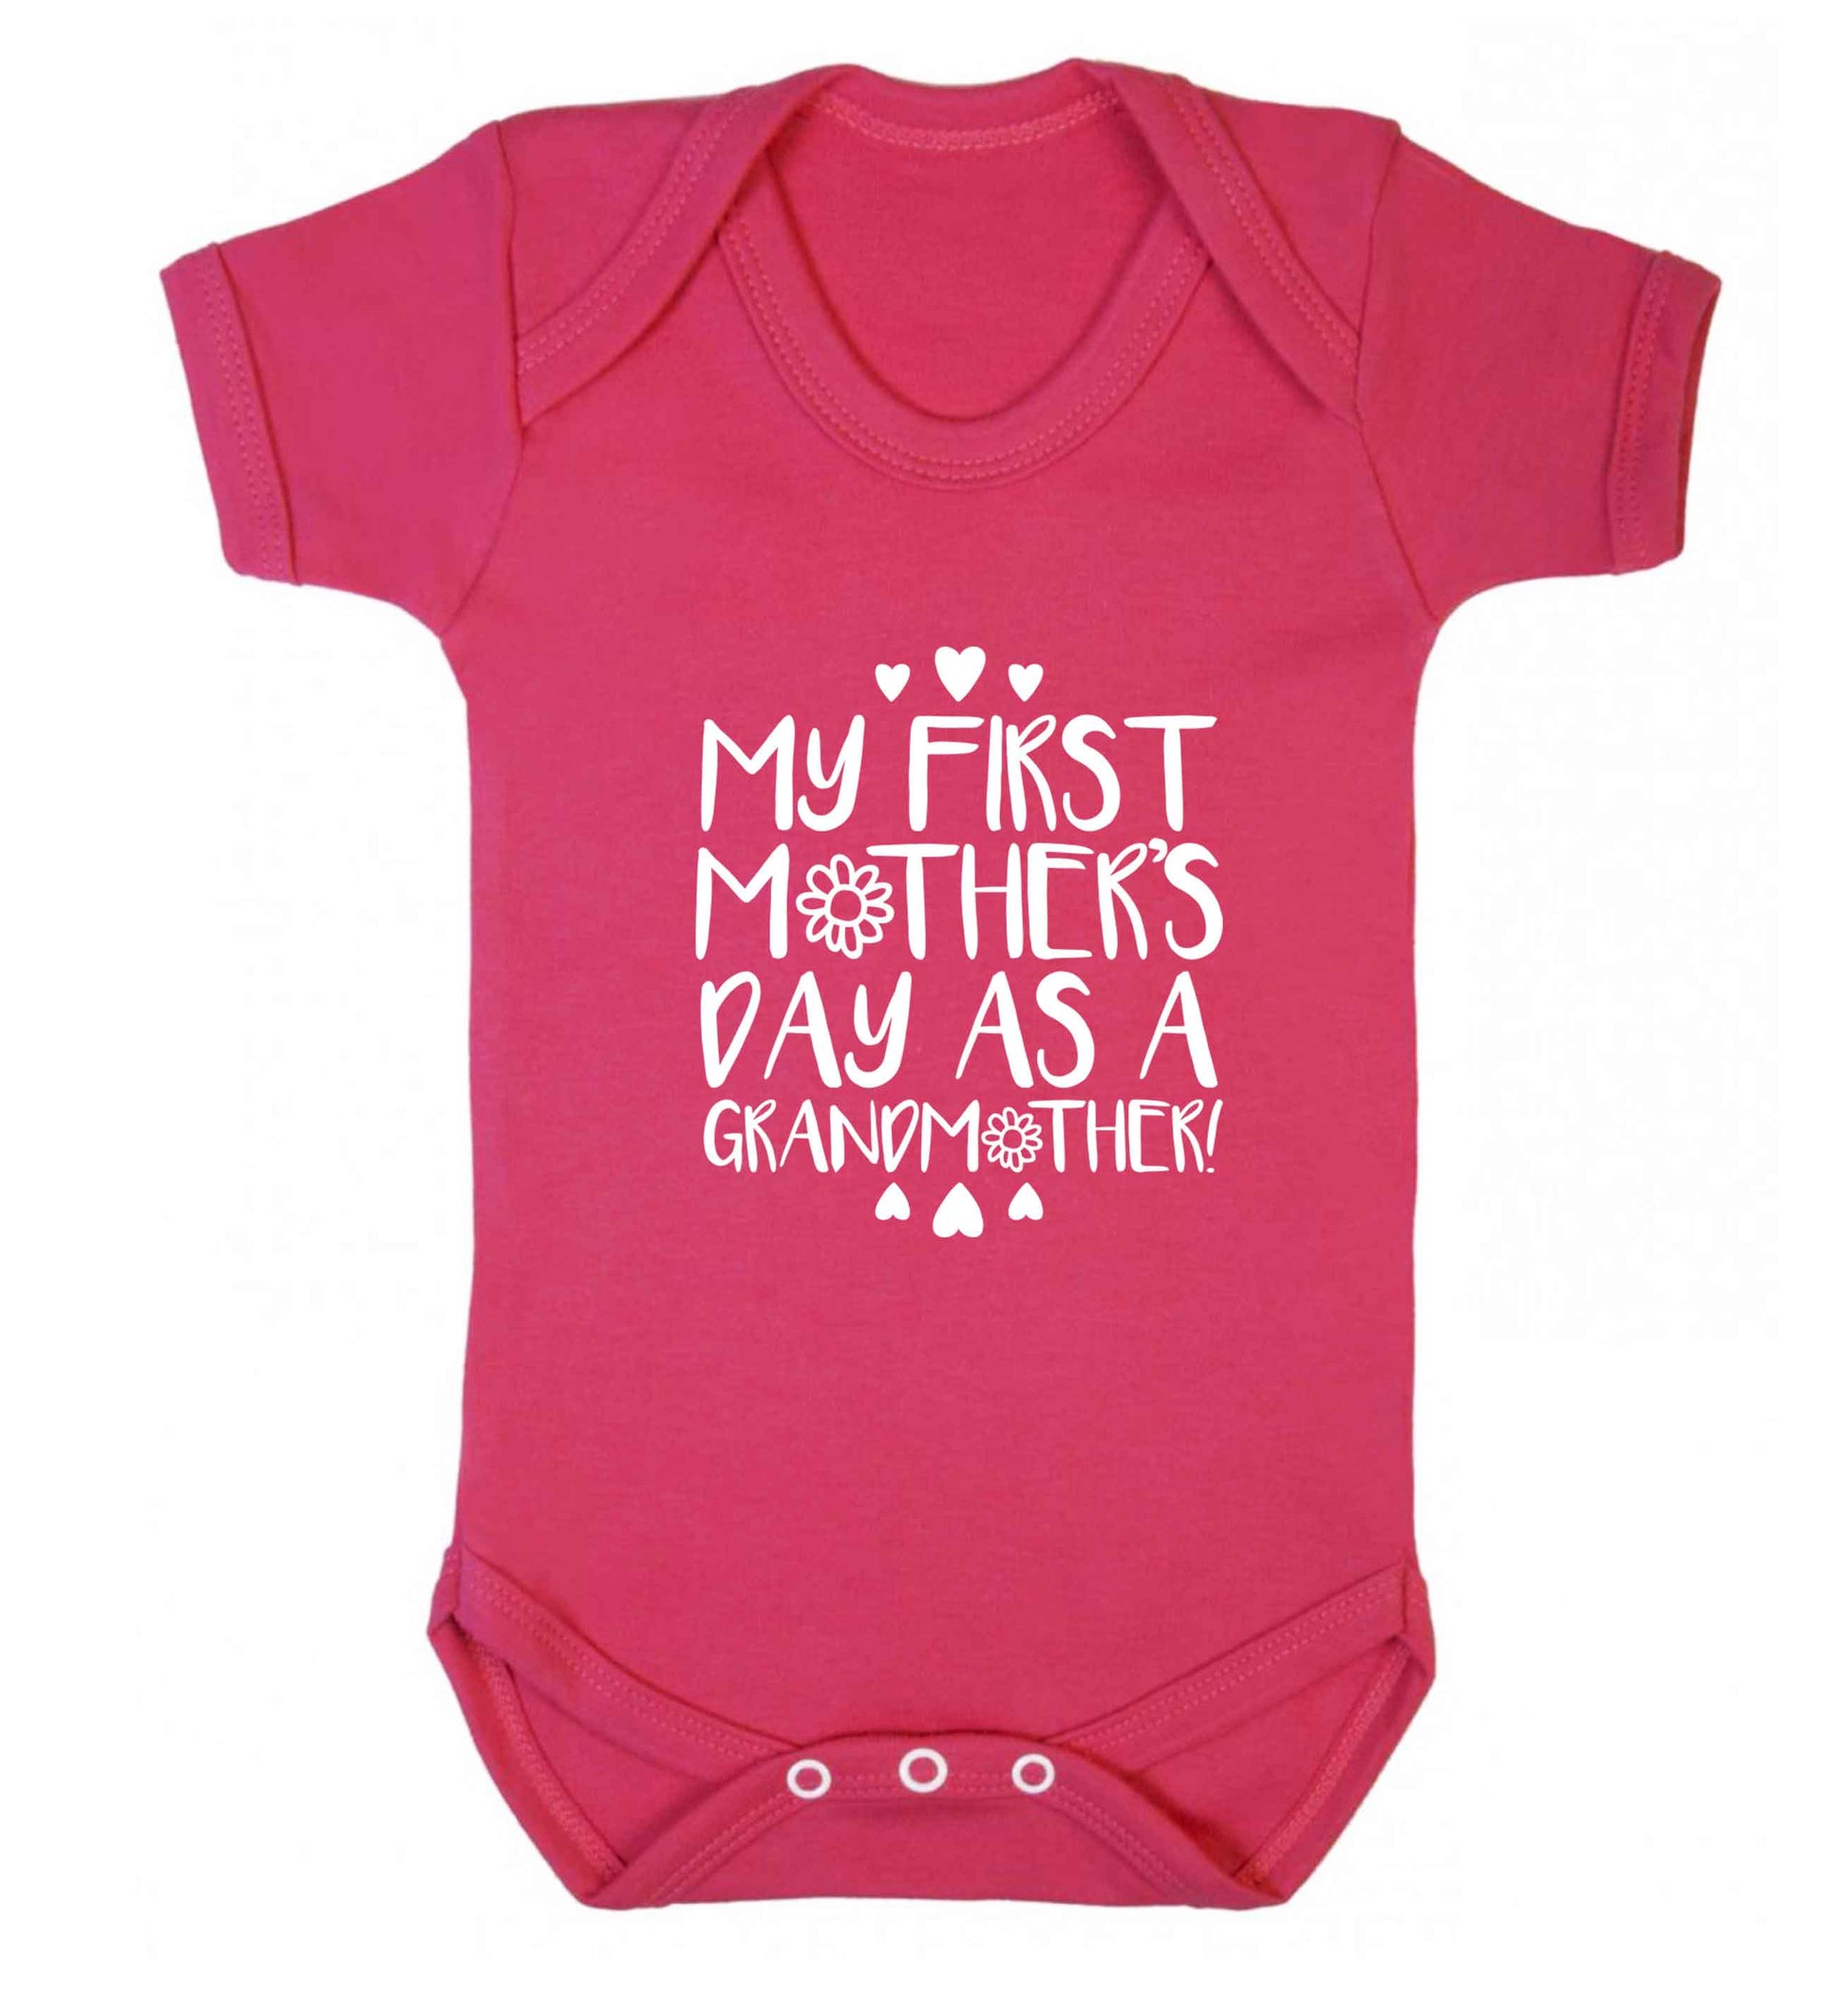 It's my first mother's day as a grandmother baby vest dark pink 18-24 months